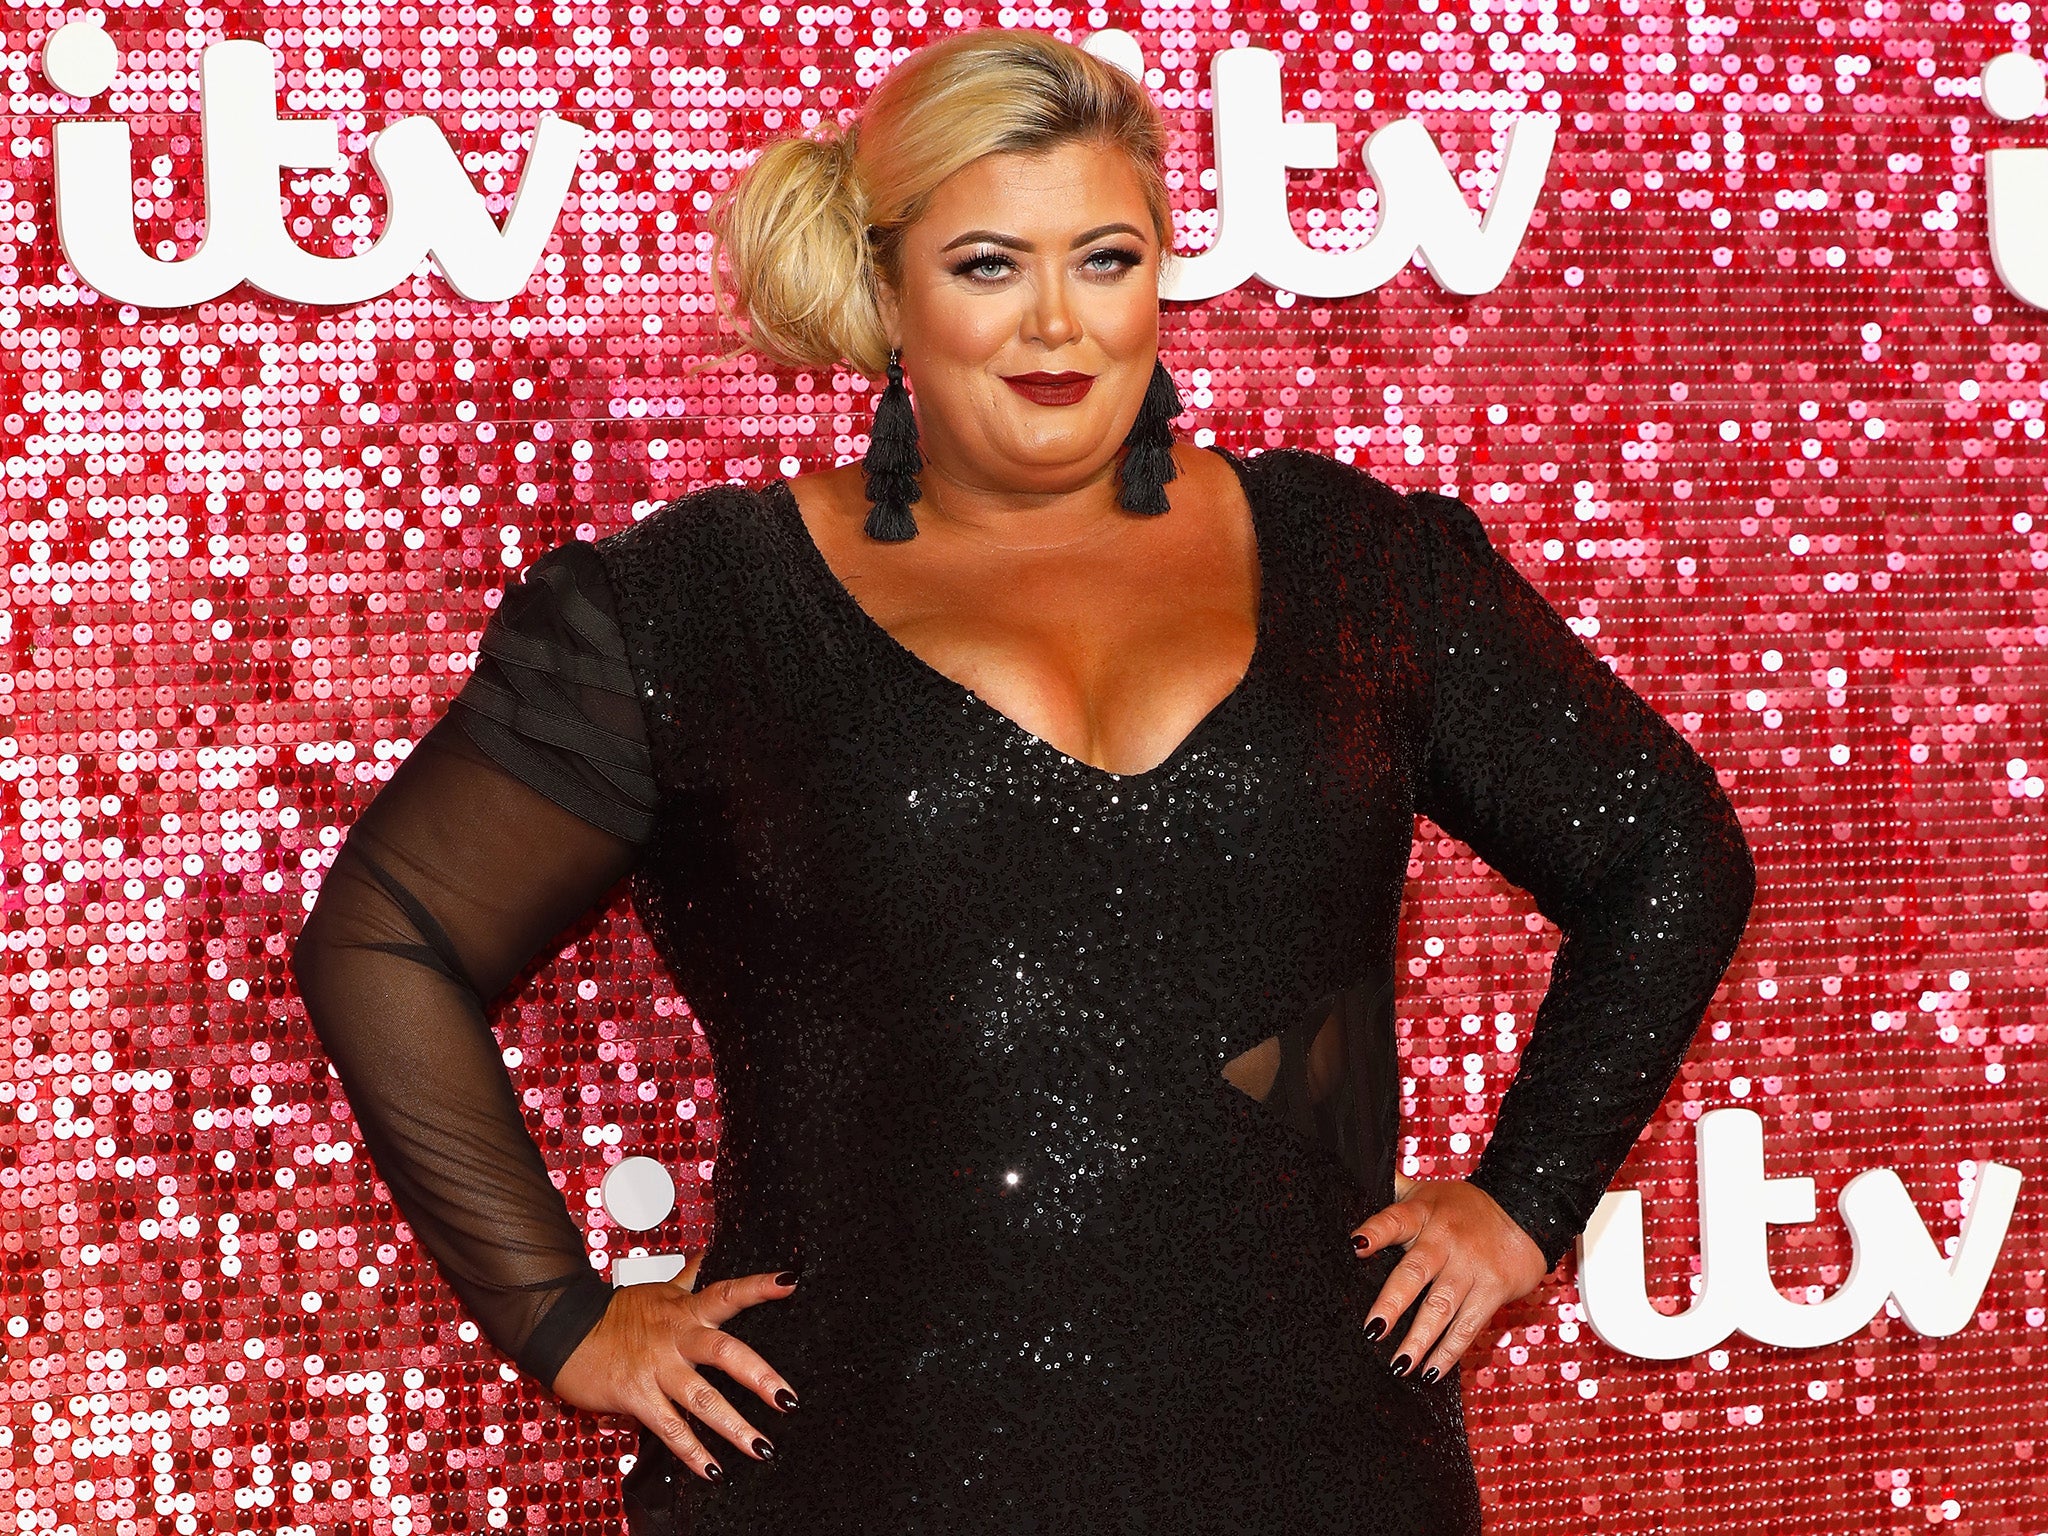 Gemma Collins arriving at the ITV Gala